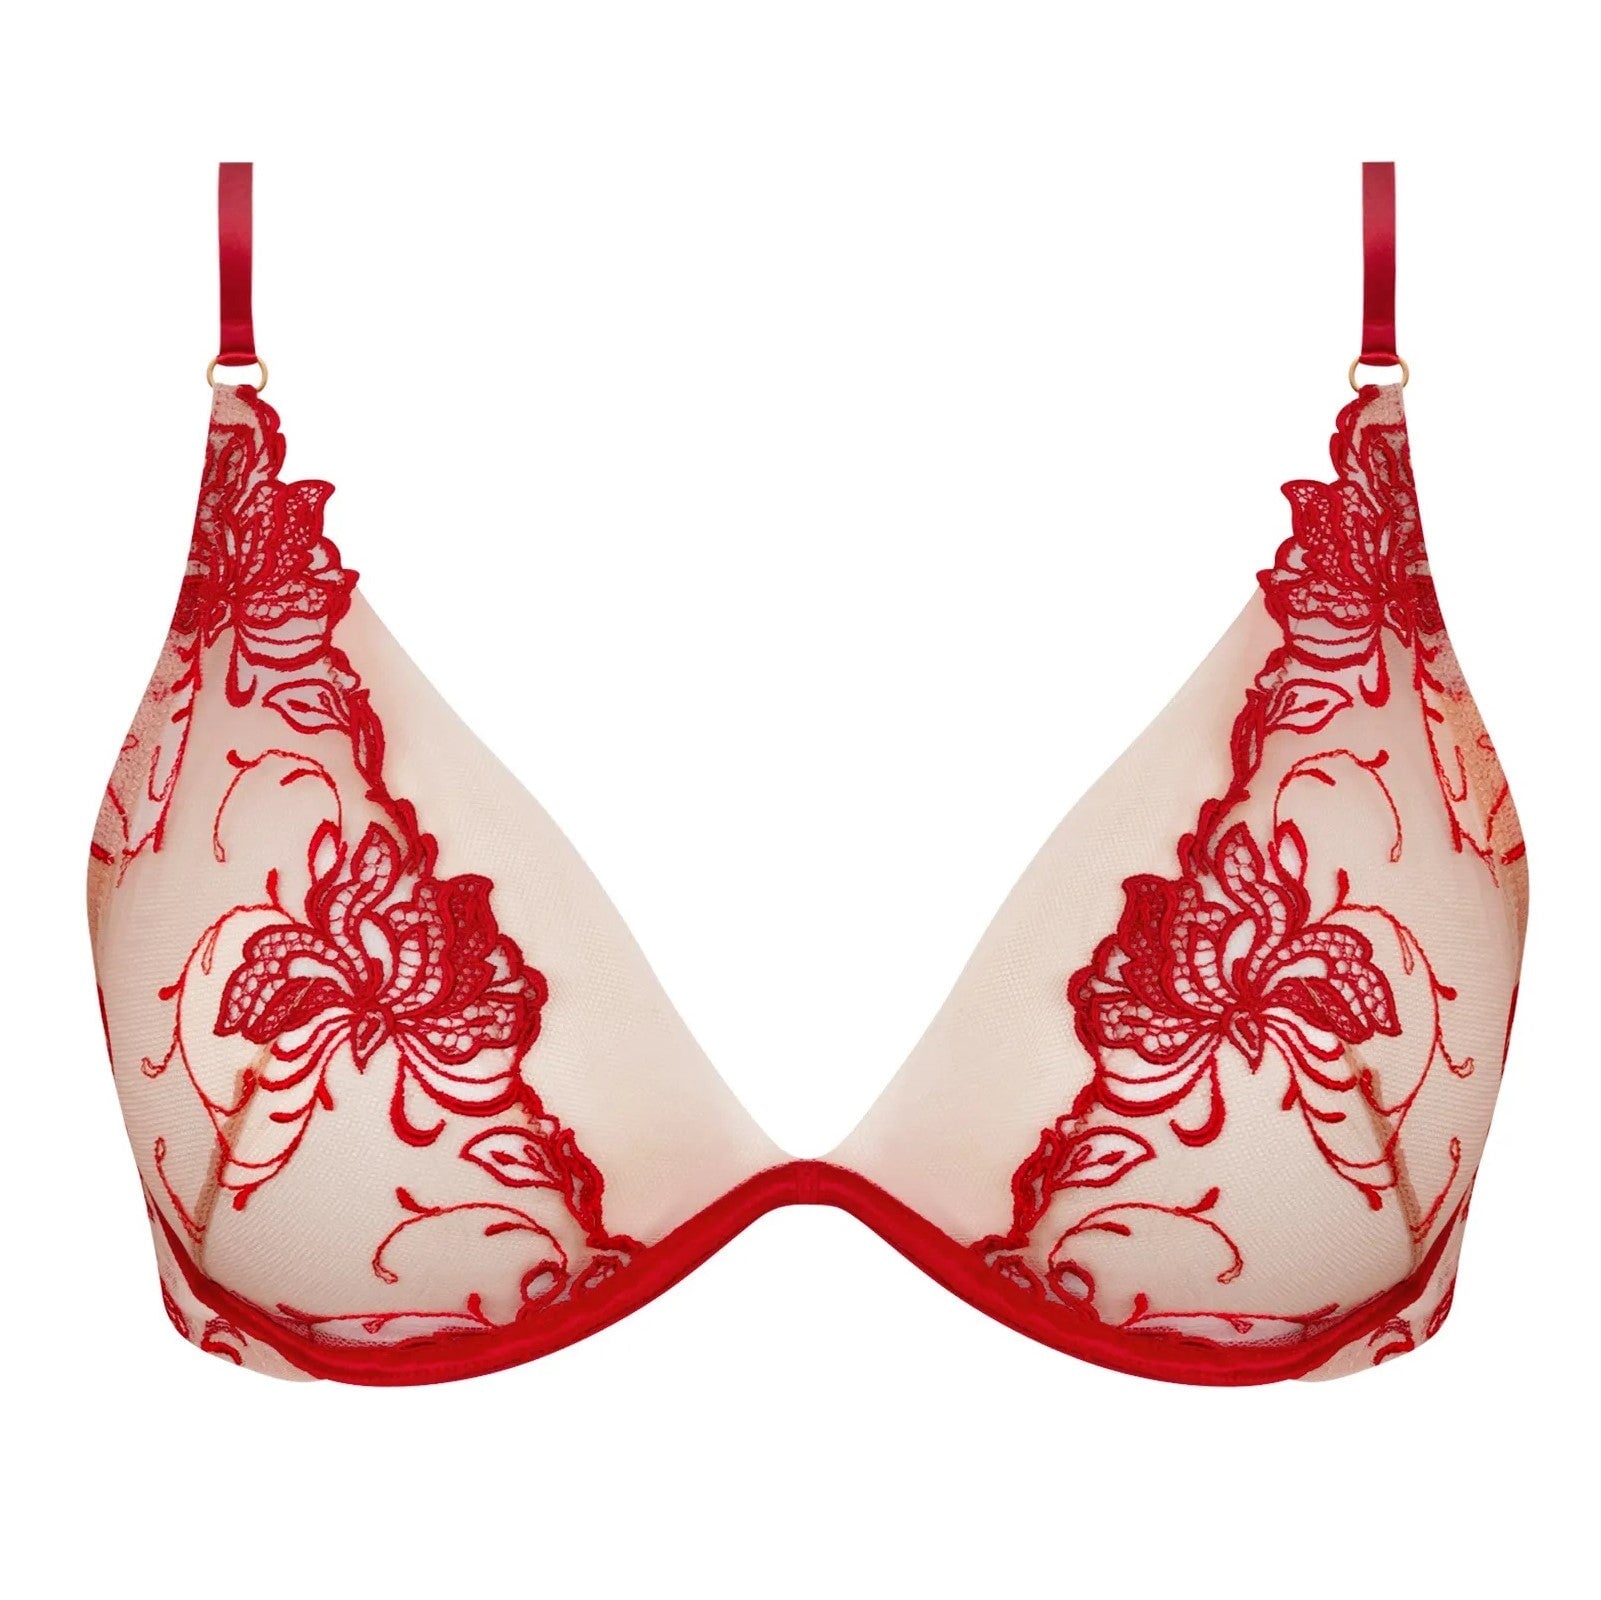 Triangle soft cup bra by Epure Lise Charmel - Revelation Beauté collection